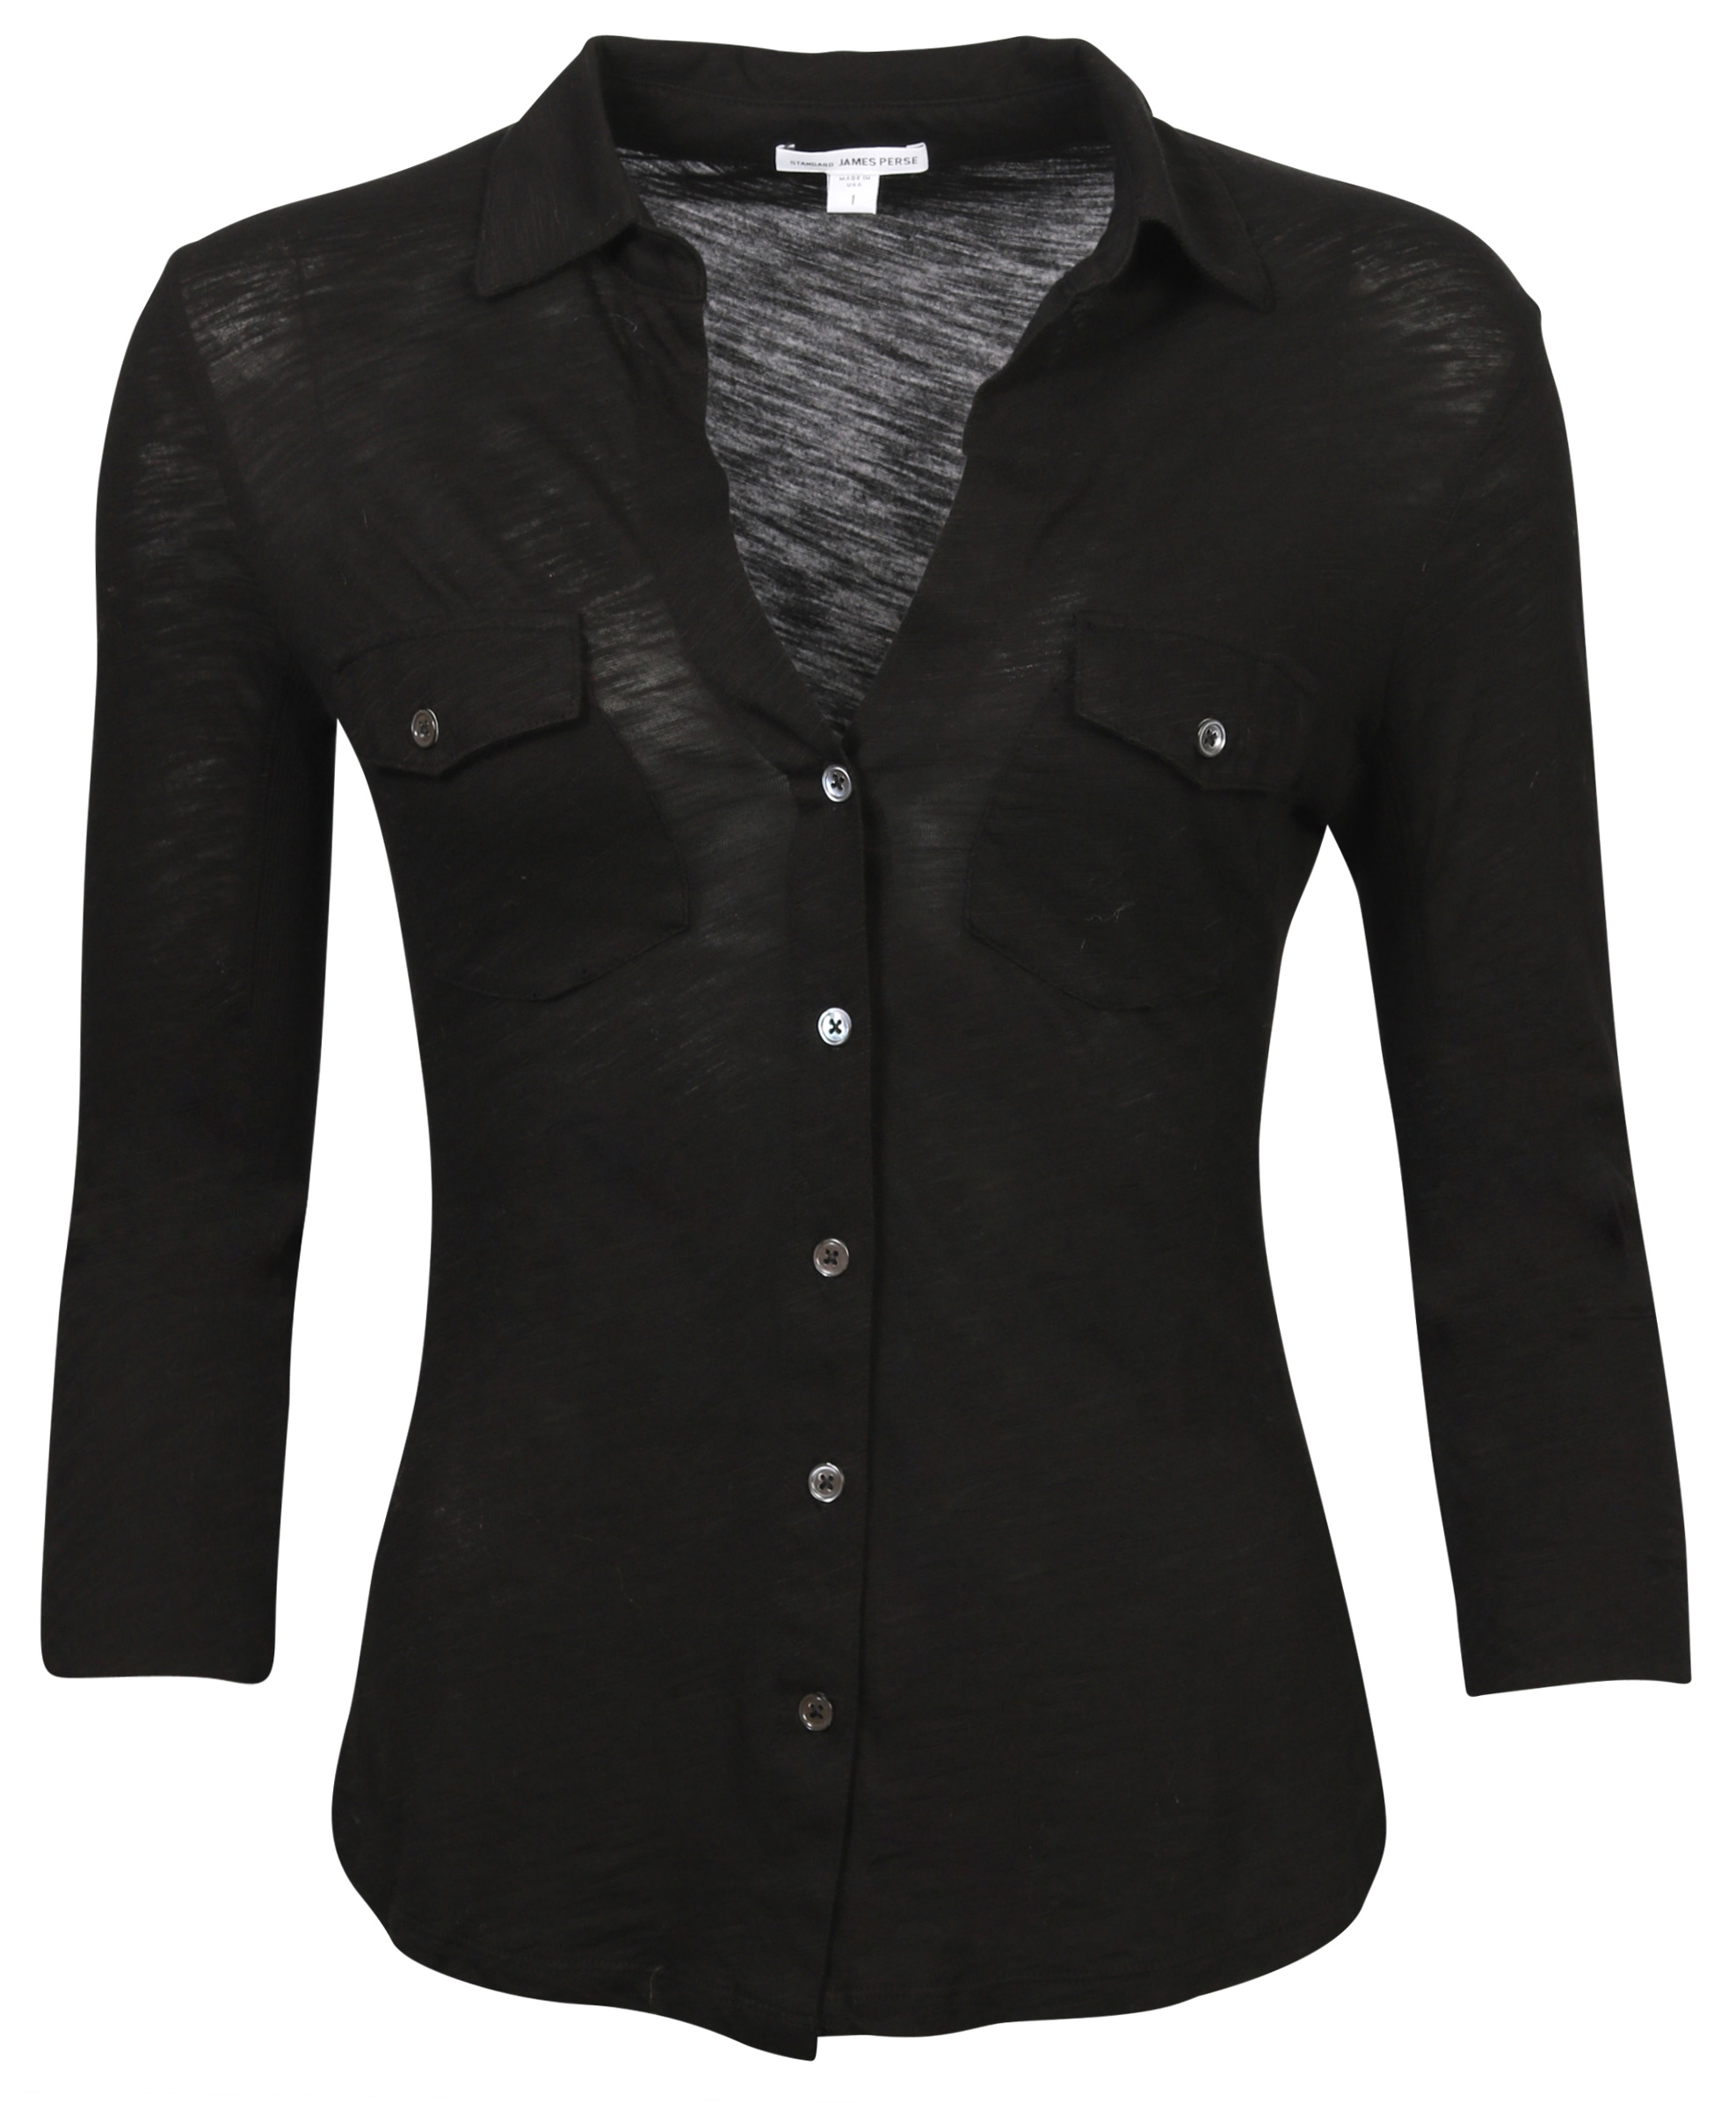 JAMES PERSE Contrast Panel Shirt in Black 4/XL